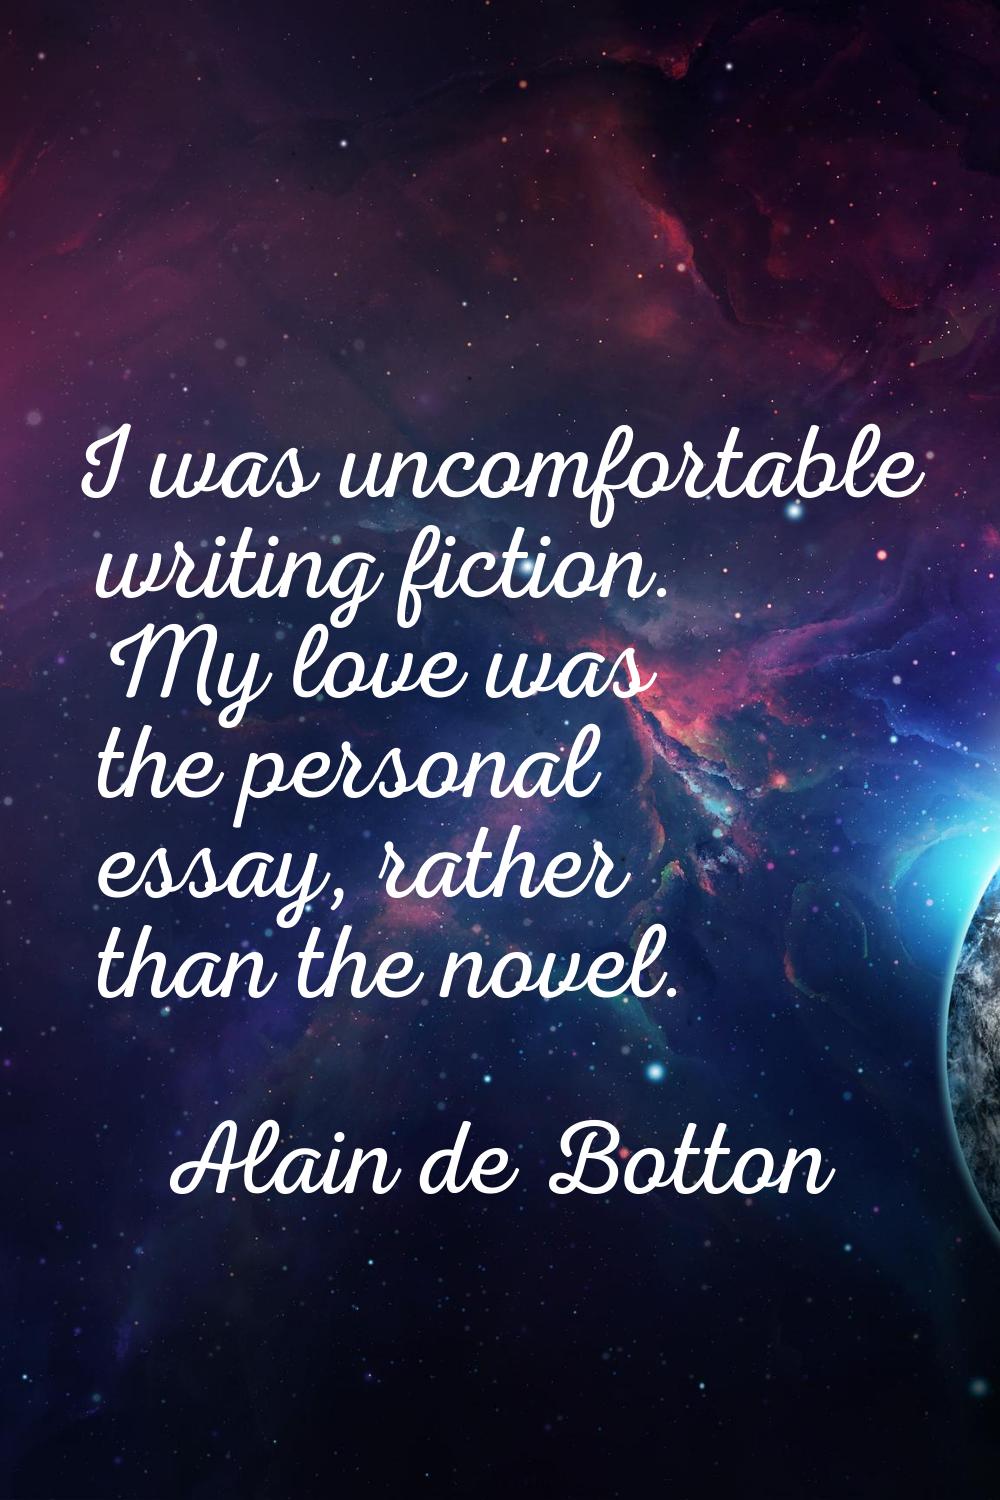 I was uncomfortable writing fiction. My love was the personal essay, rather than the novel.